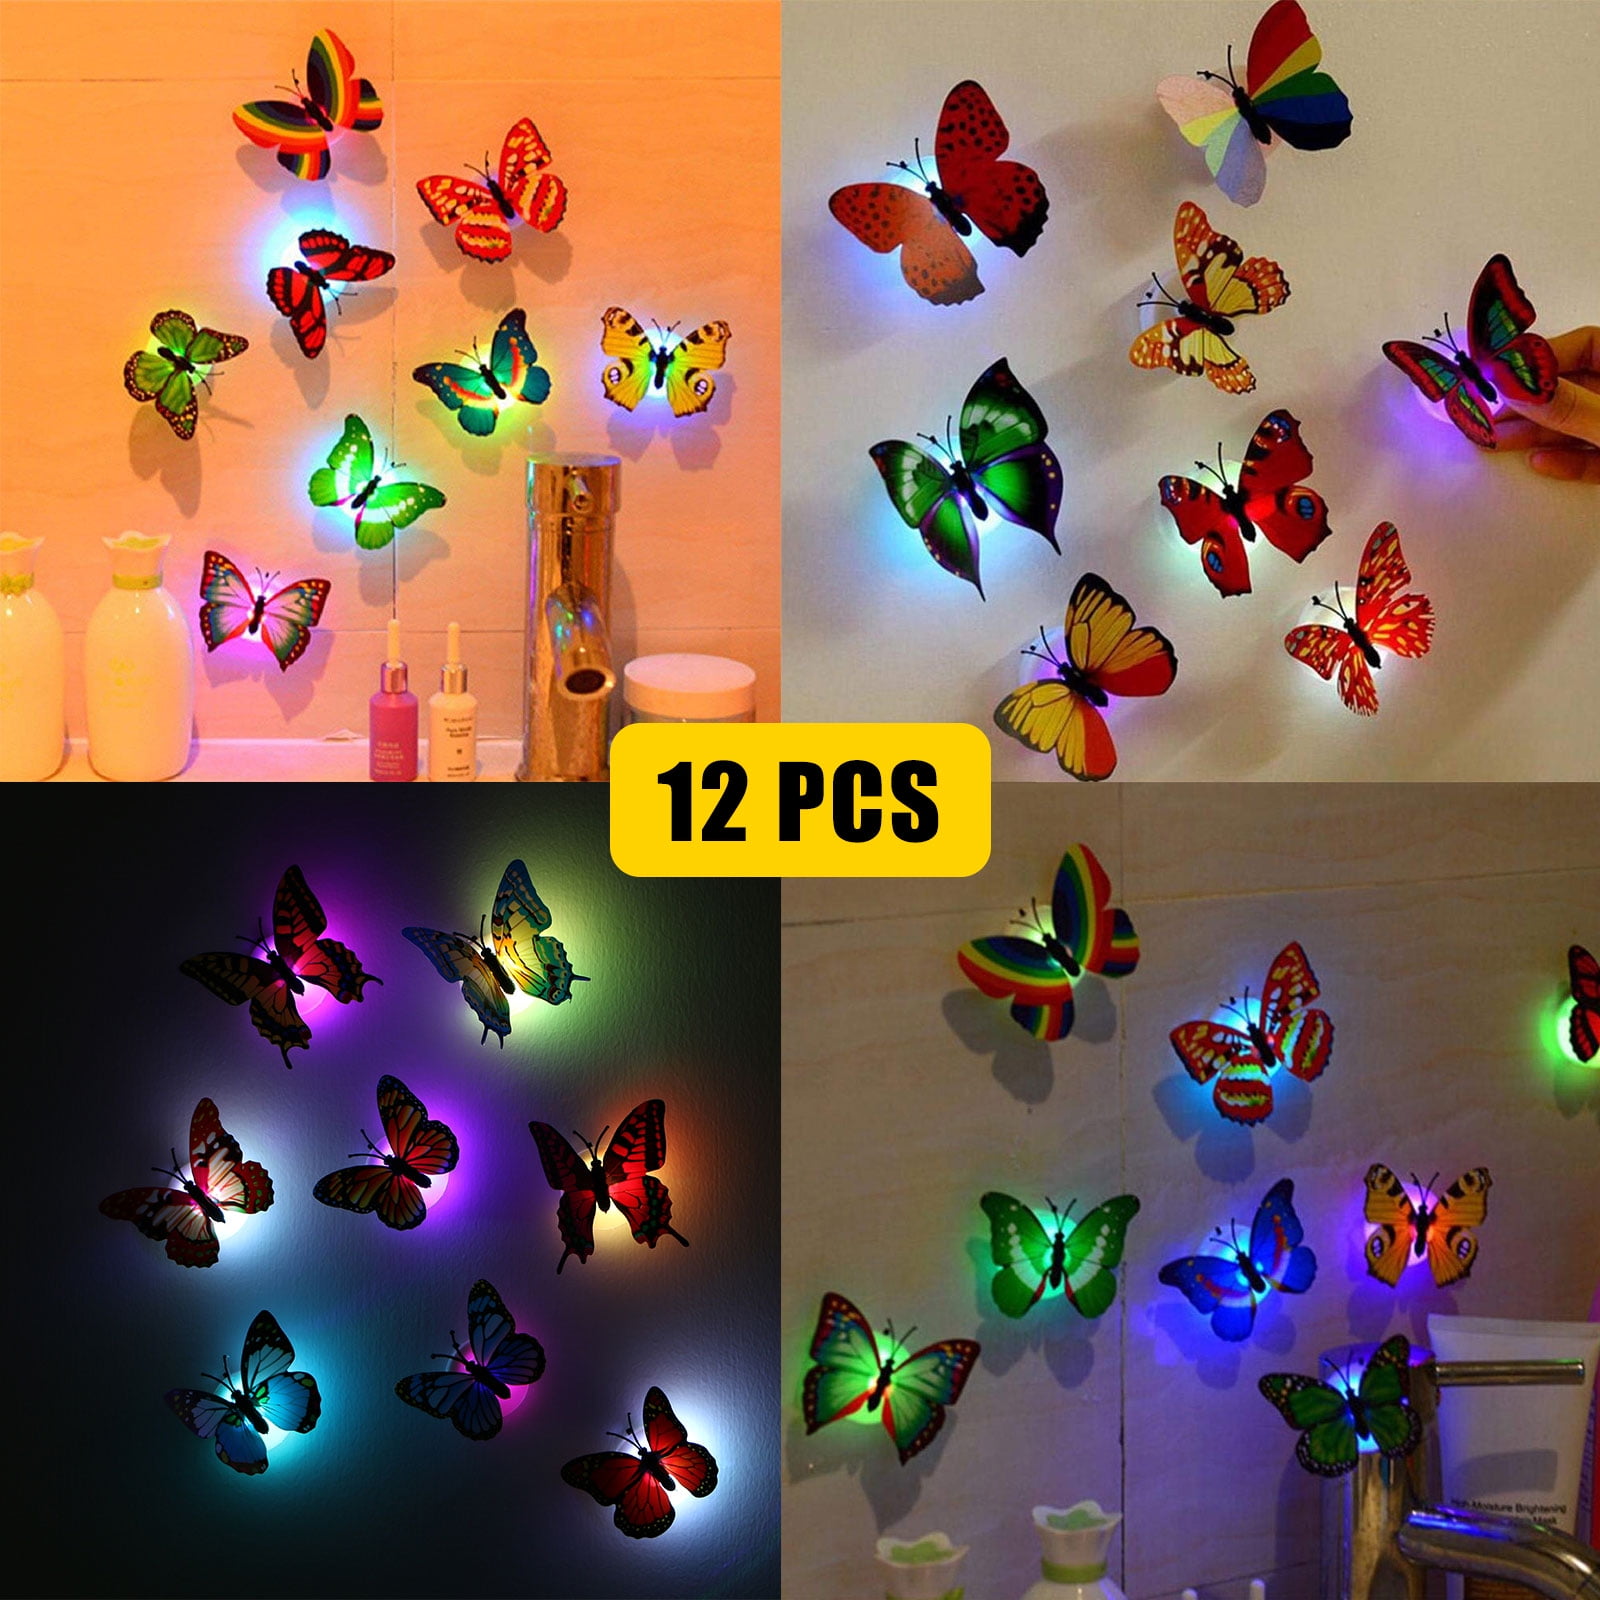 DIY 3D Butterfly Wall Stickers Home Room Nursery Decor Art Mural Decals For Kids 